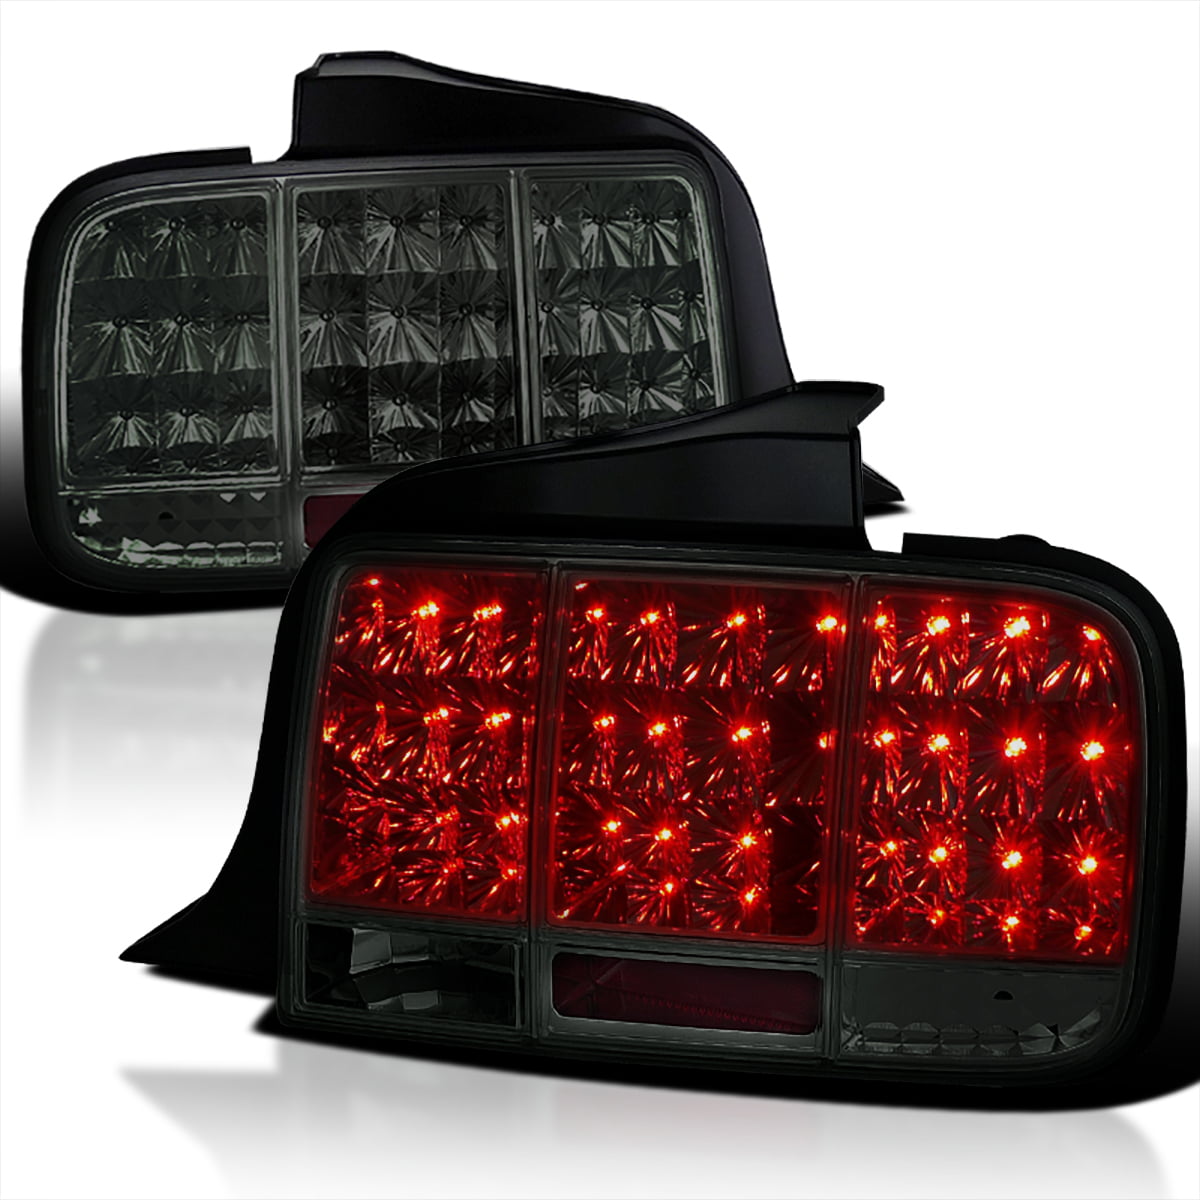 05-09 Mustang Sequential LED Smoke Lens Parking Tail Lights Brake Rear Lamps 